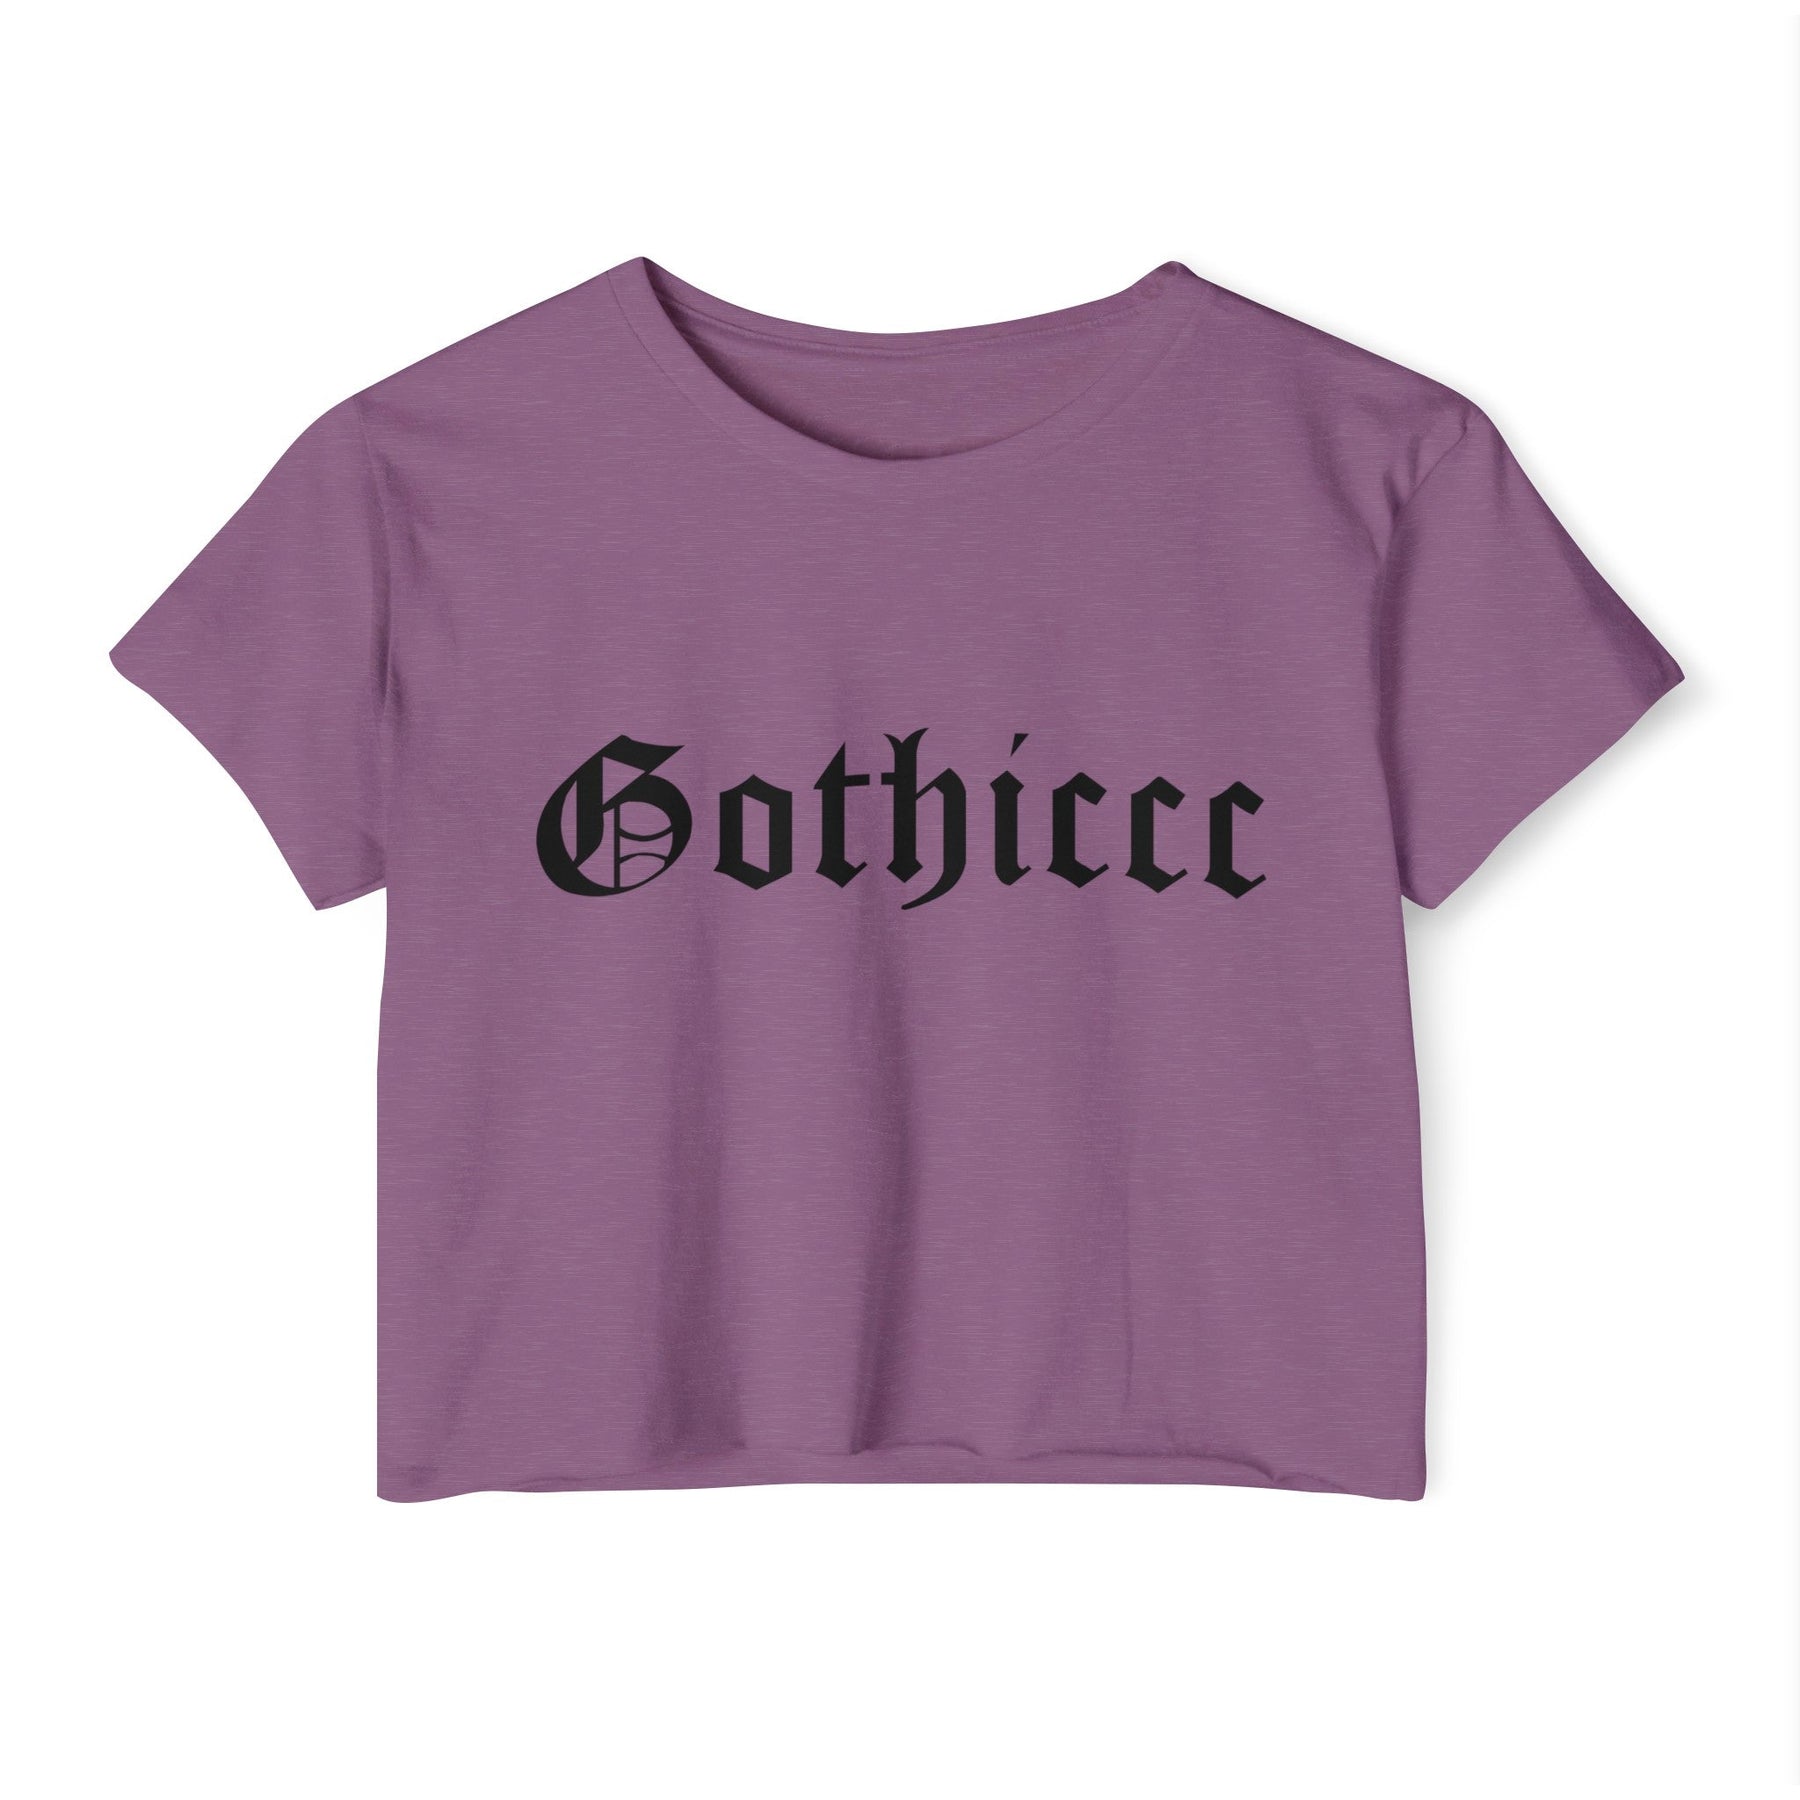 Gothiccc Women's Lightweight Crop Top - Goth Cloth Co.T - Shirt58240186108422510020